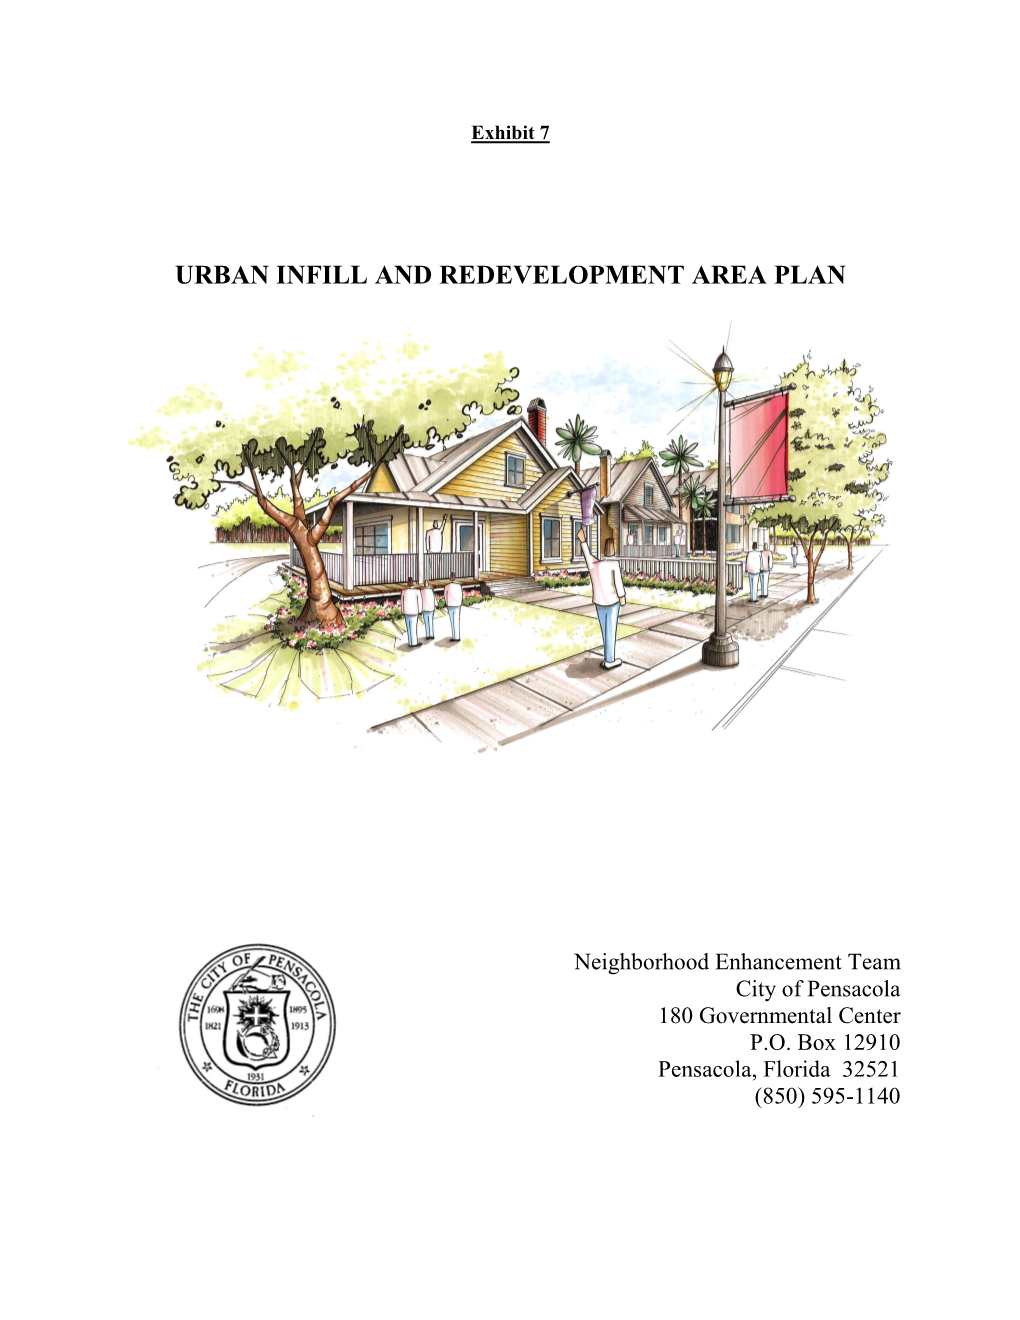 Urban Infill and Redevelopment Area Plan